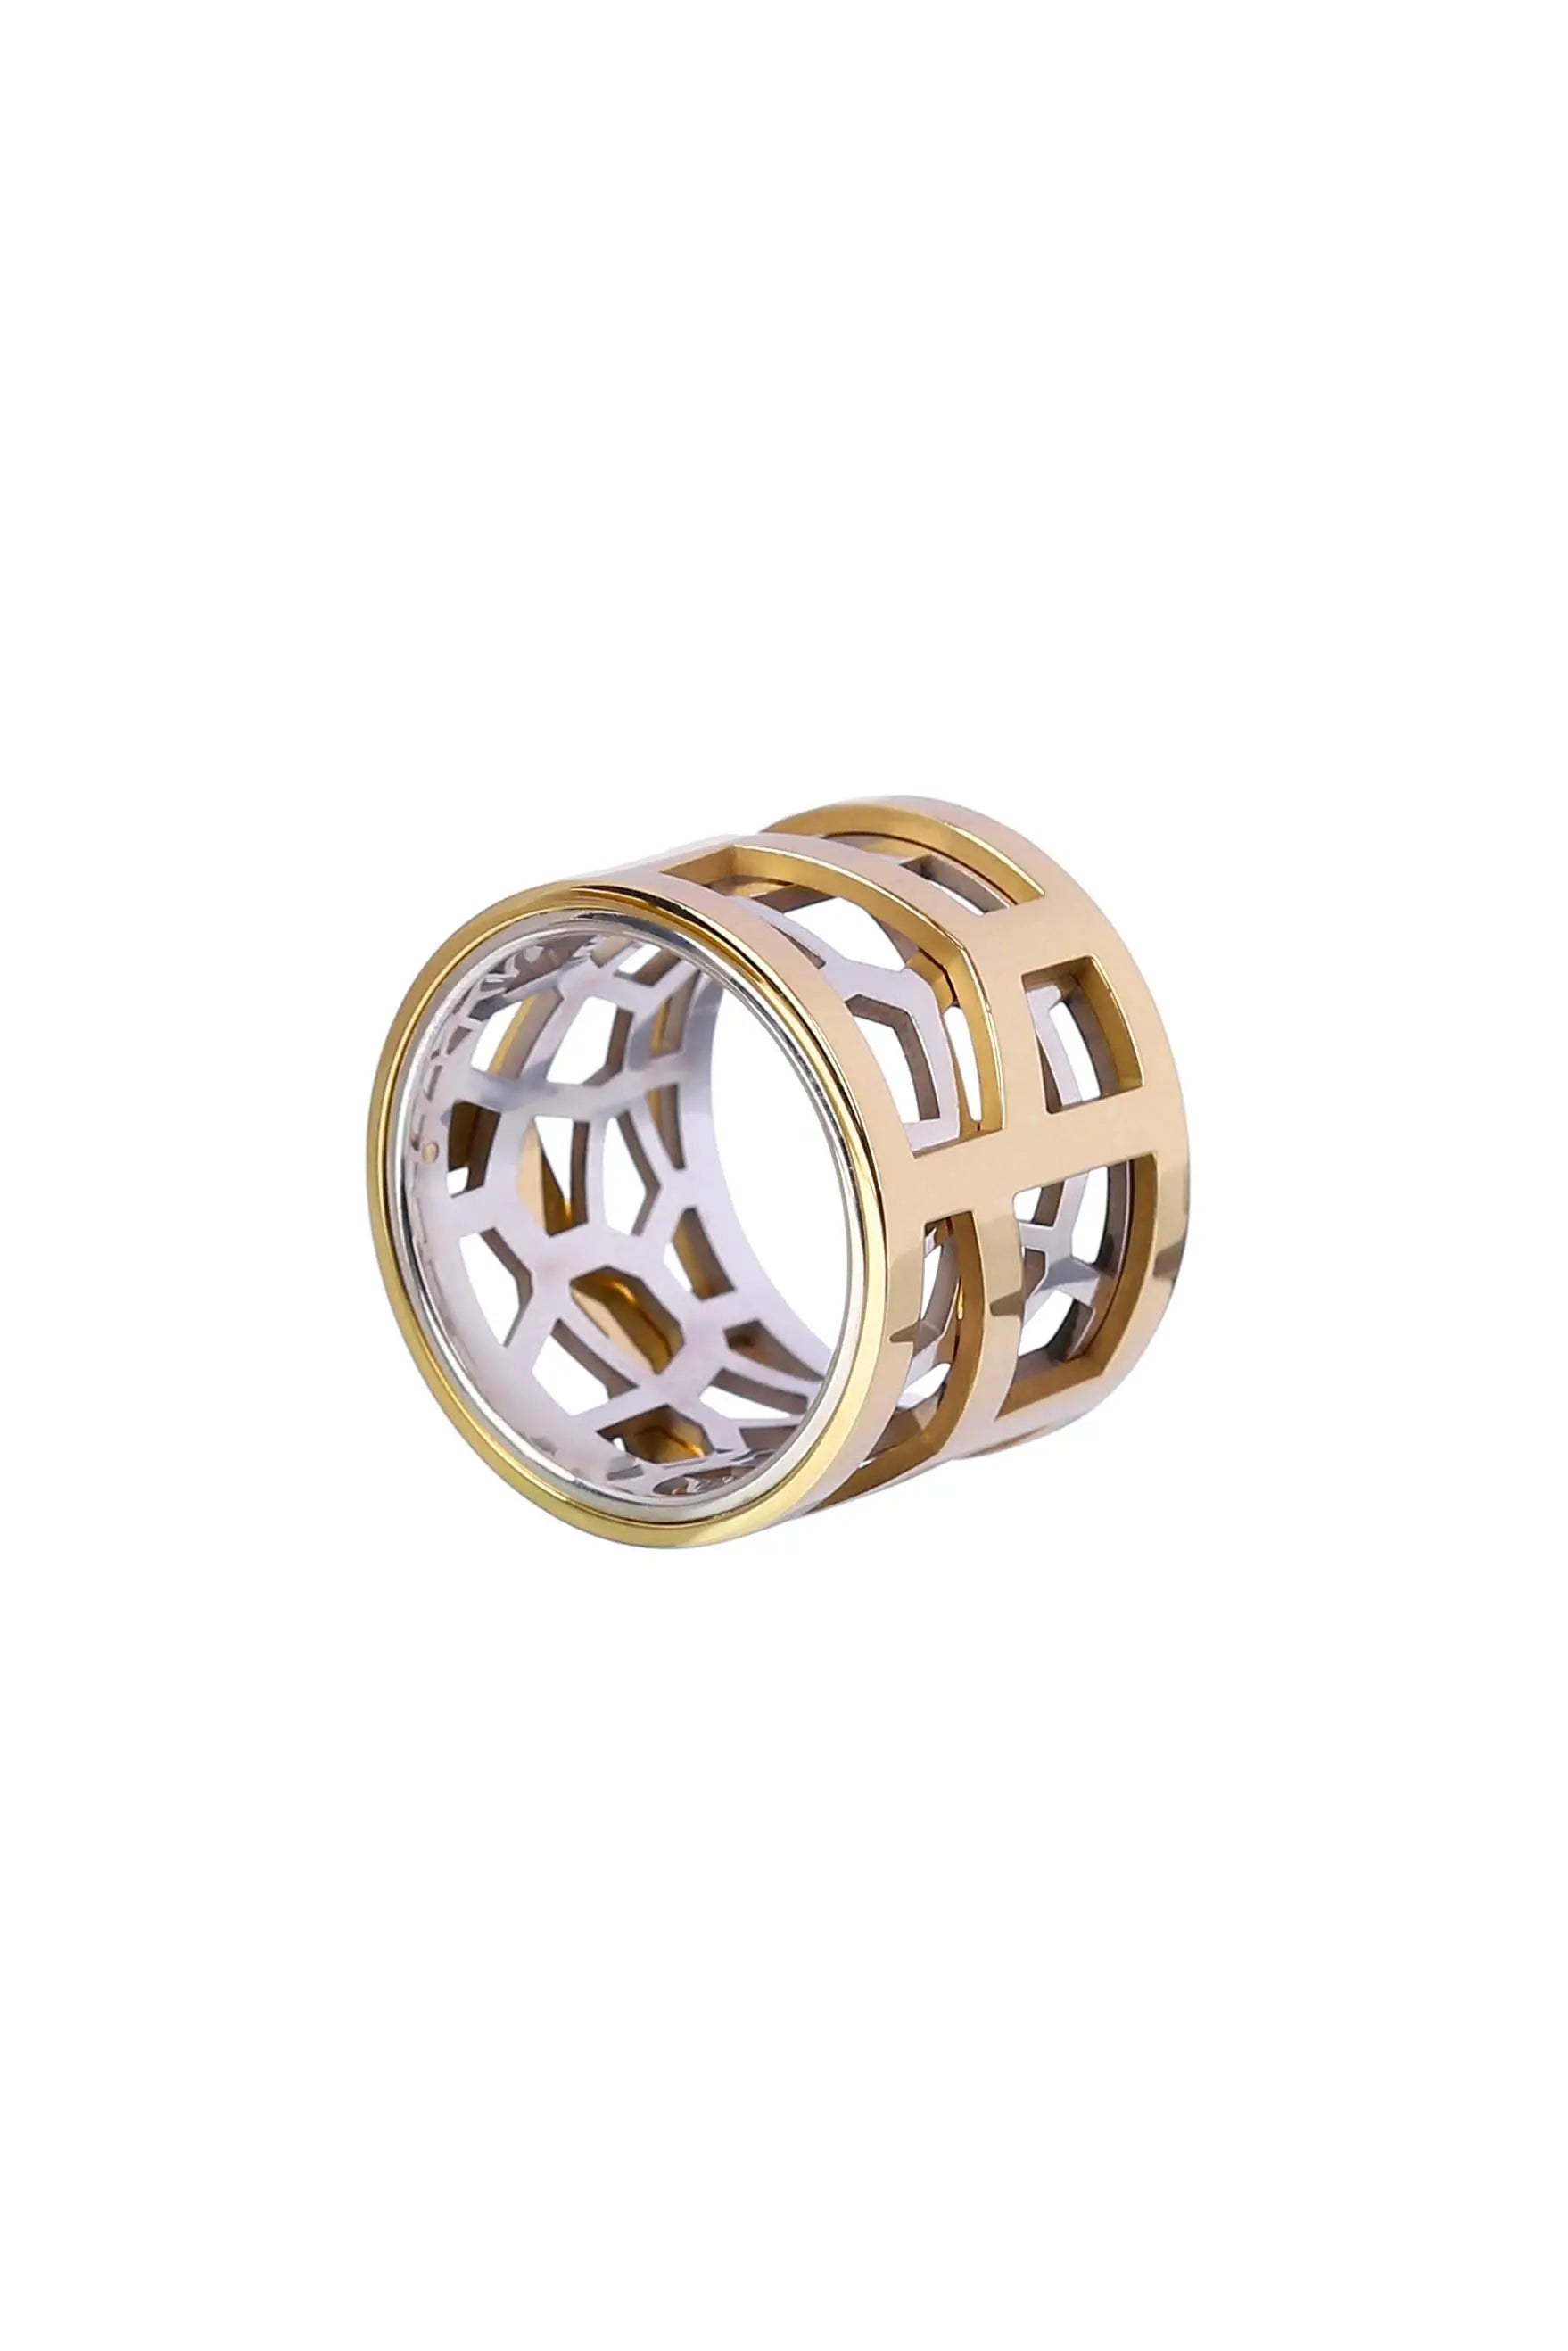 Double web tall ring - CDD Jewelry